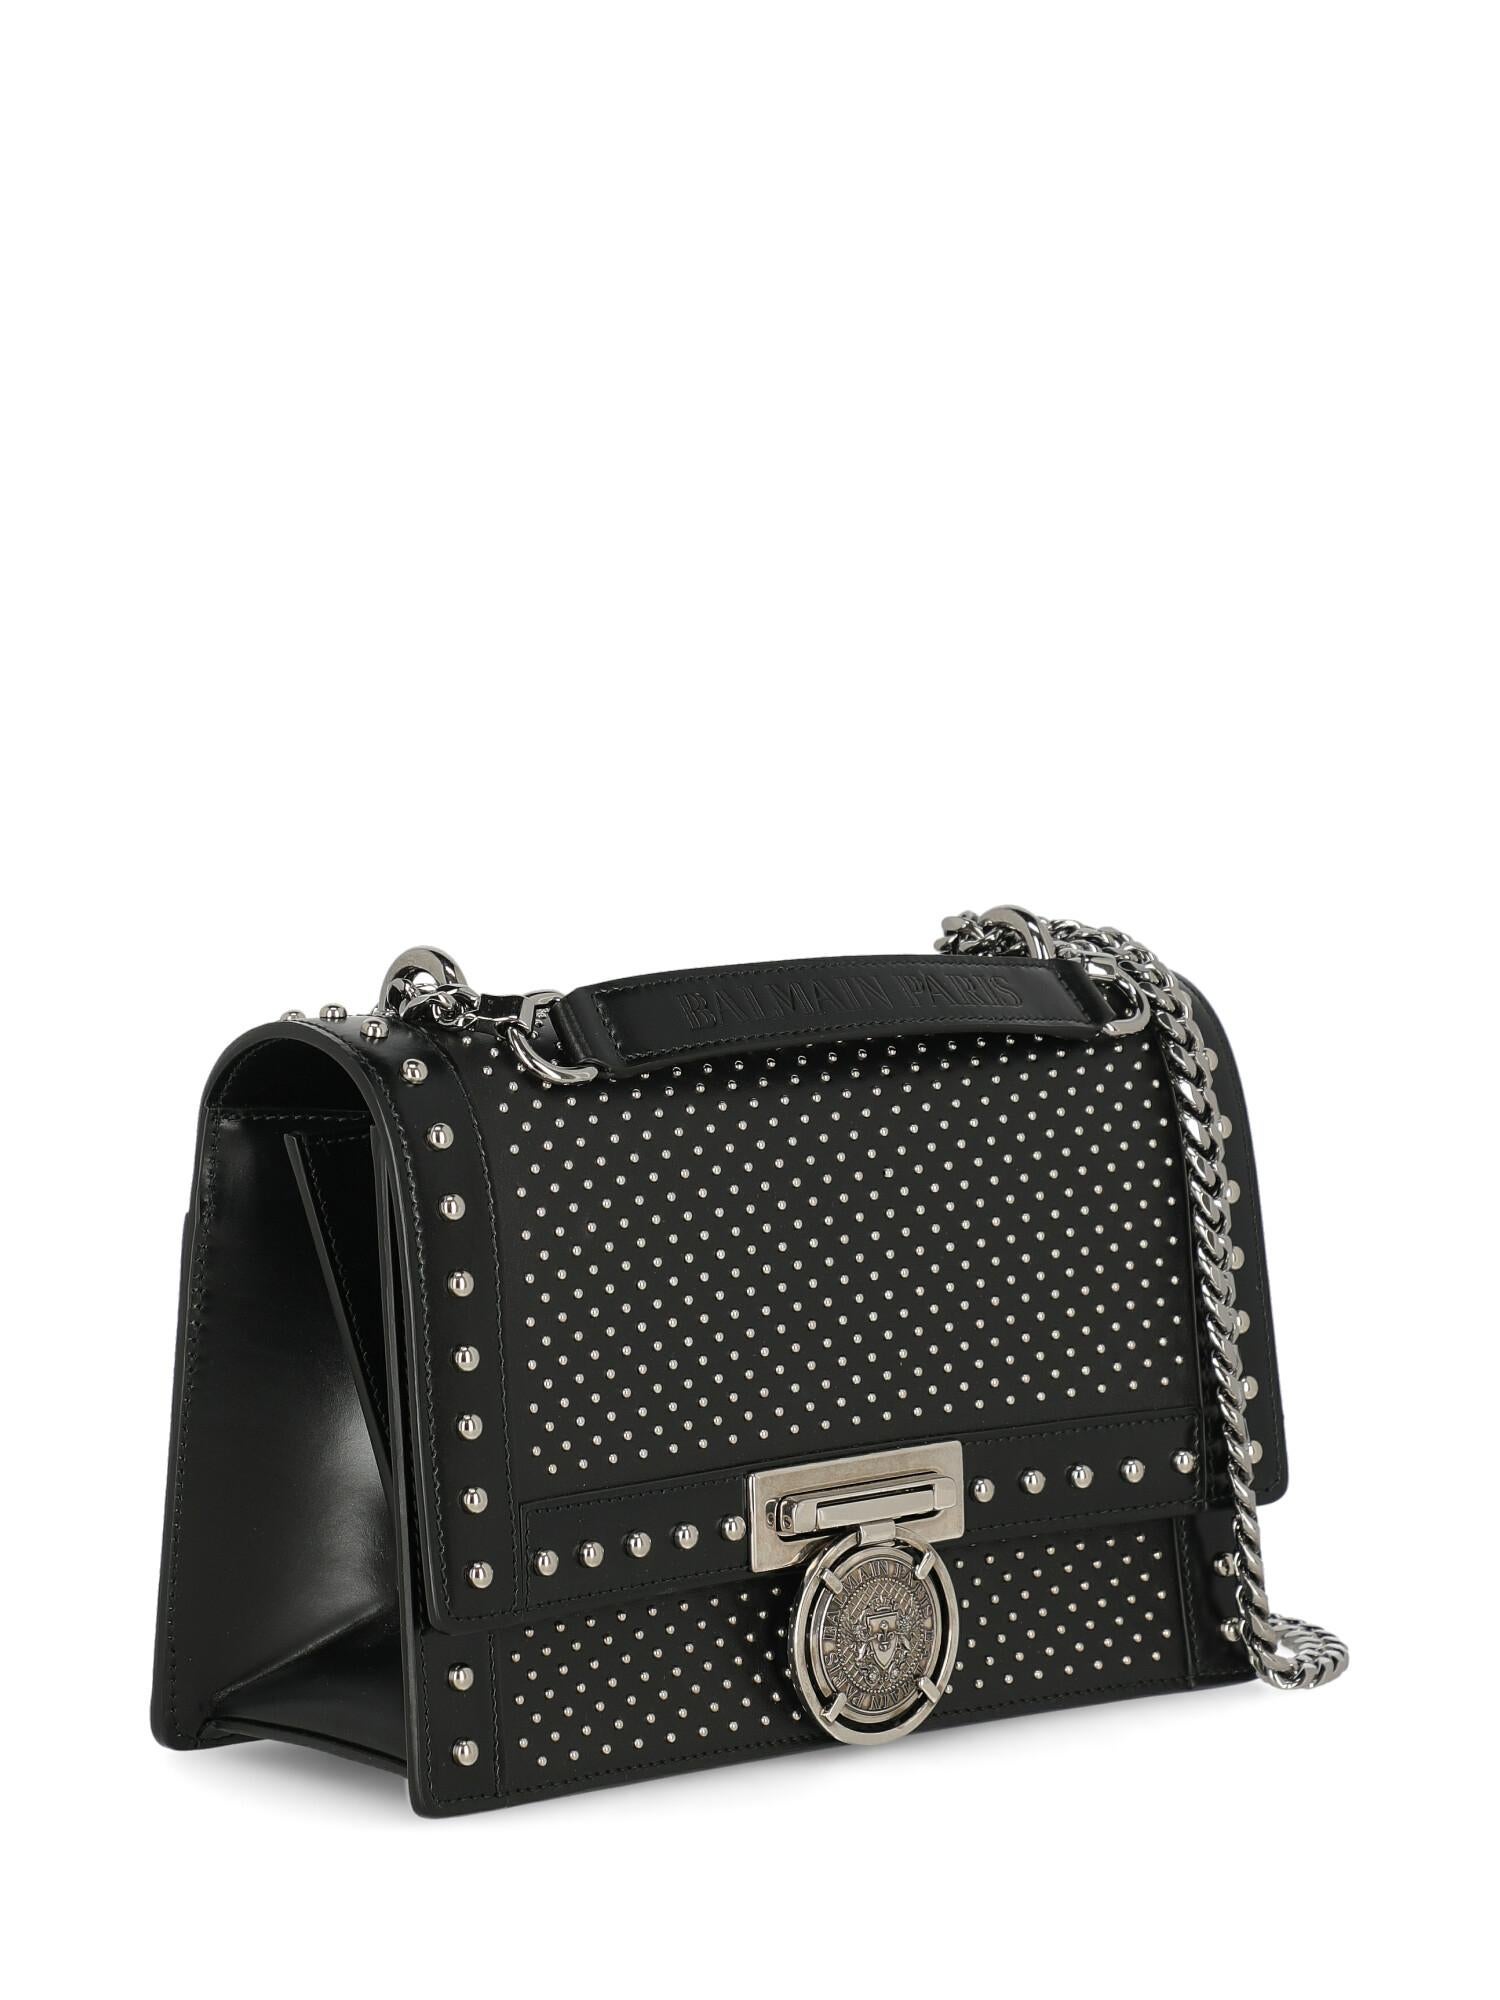 Balmain Woman Shoulder bag Black Leather In Good Condition For Sale In Milan, IT